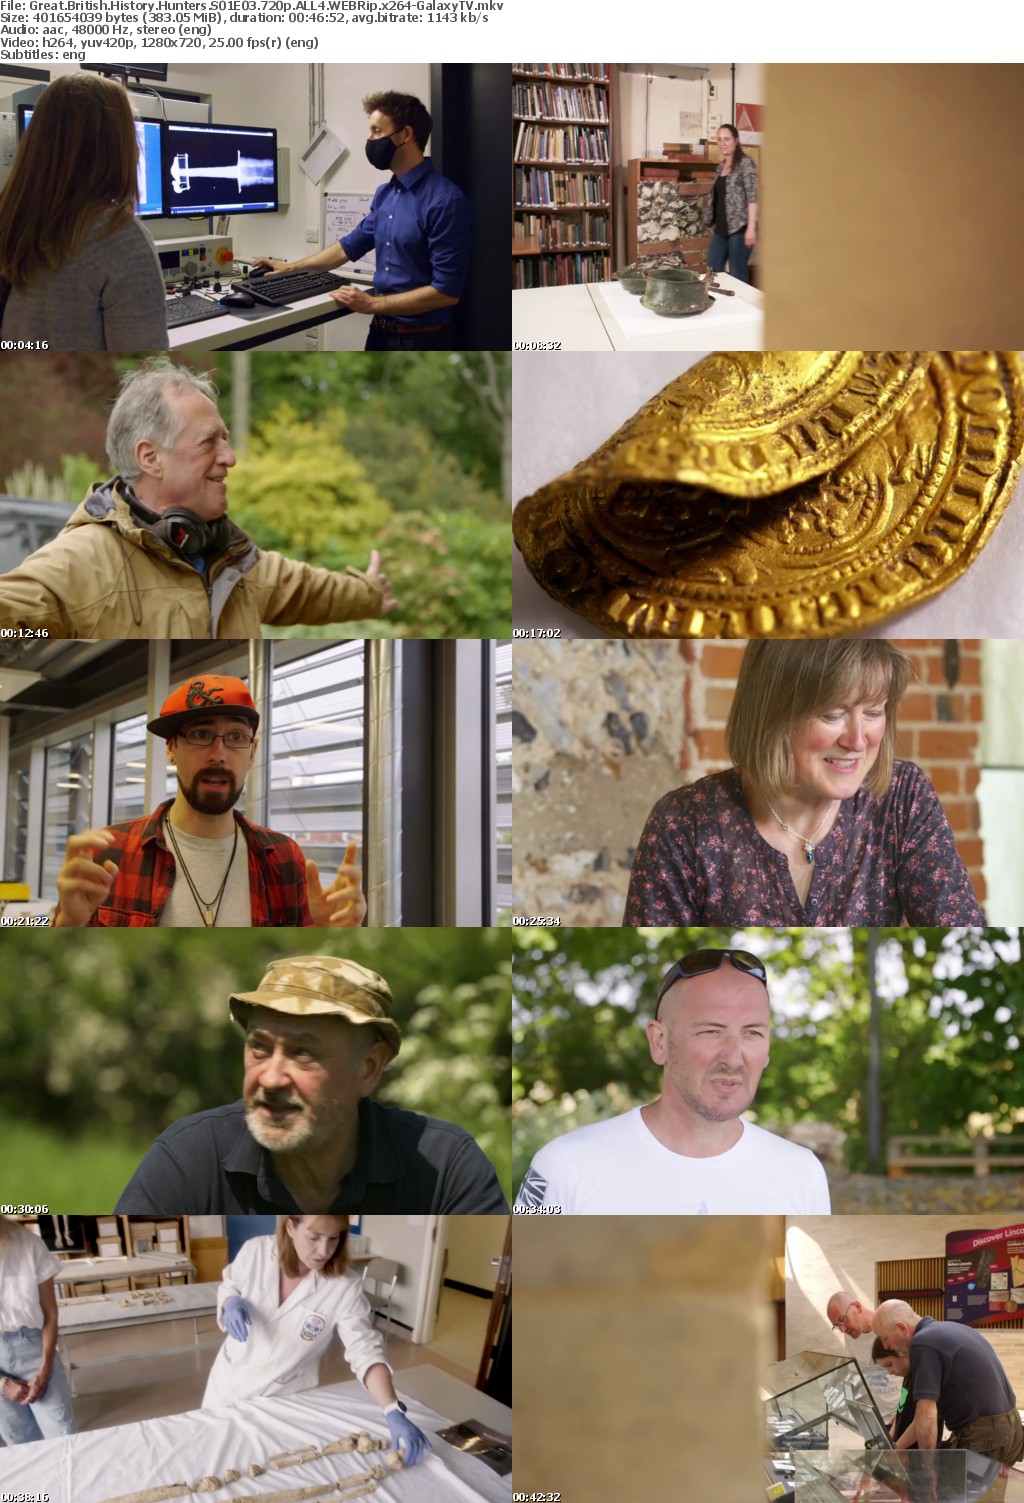 Great British History Hunters S01 COMPLETE 720p ALL4 WEBRip x264-GalaxyTV